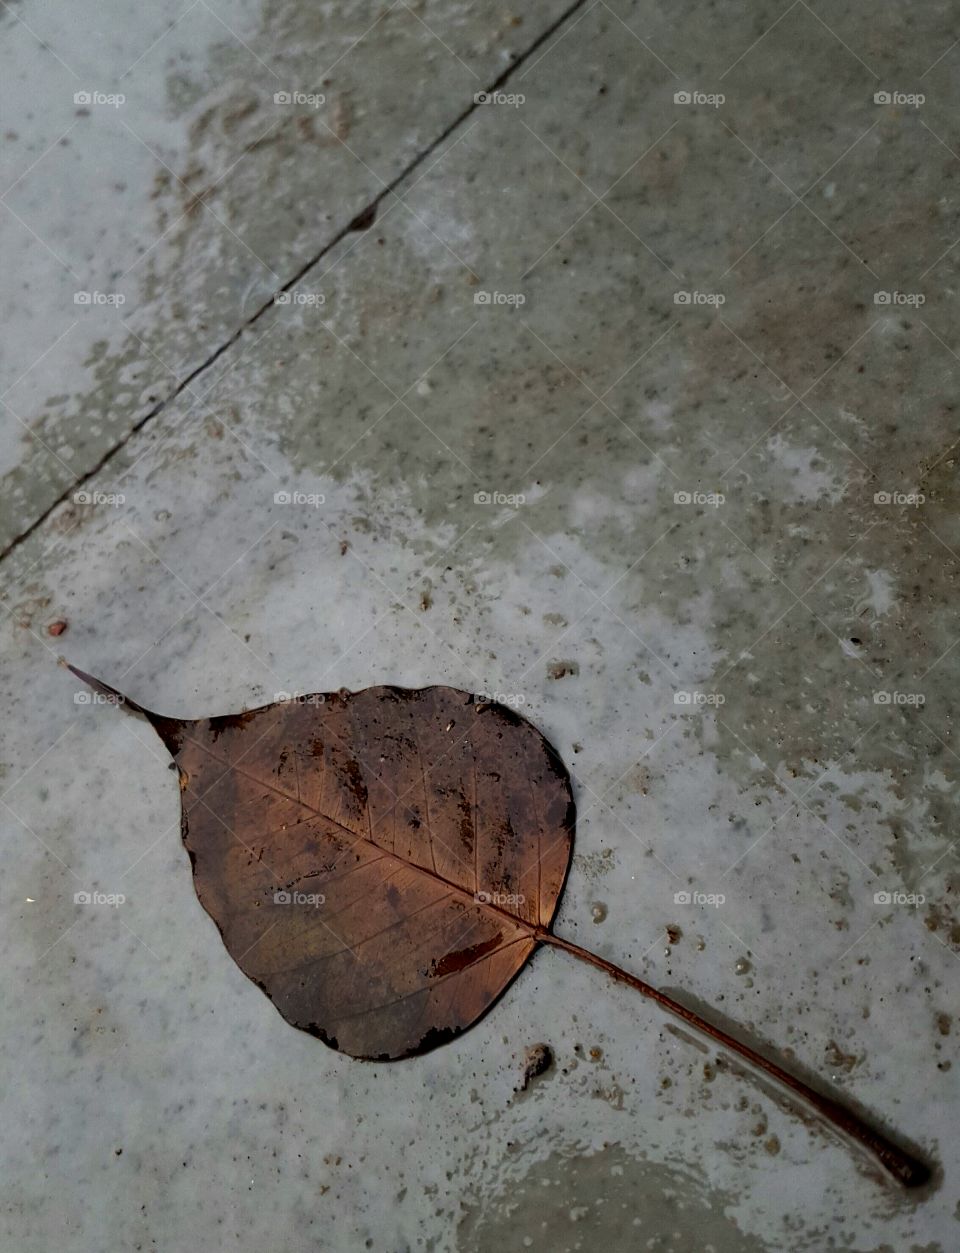 Aged and Old brown fallen leave on a wet floor